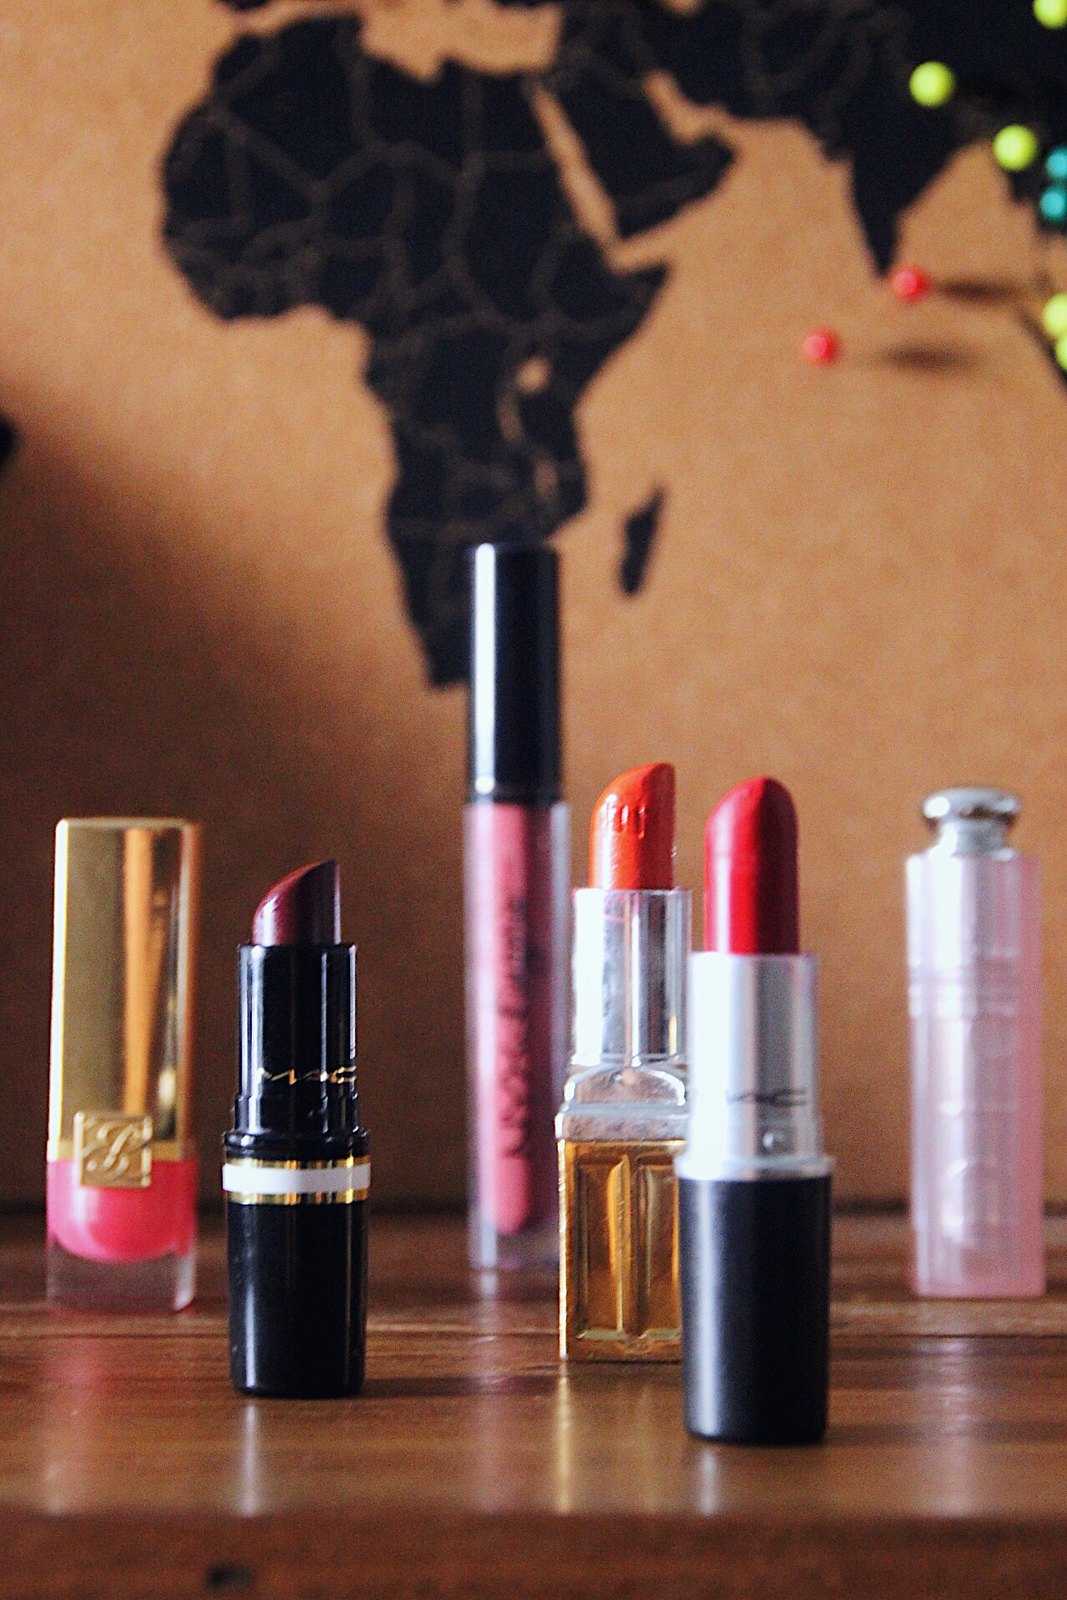 6 Lipsticks Every Woman Should Own